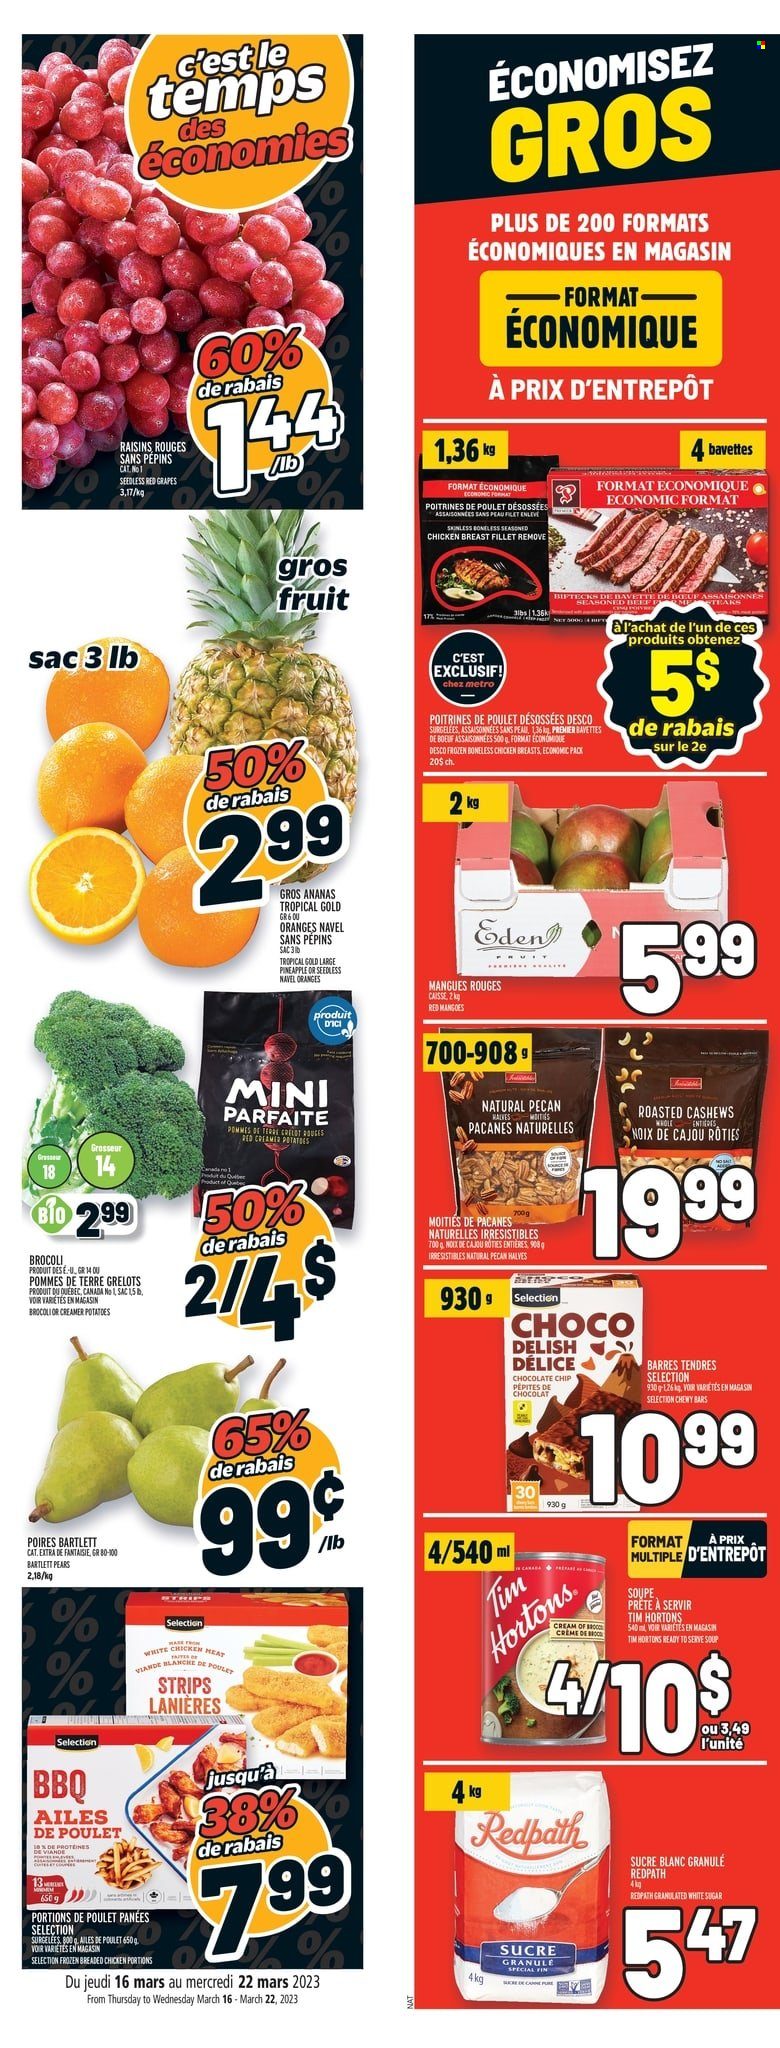 thumbnail - Metro Flyer - March 16, 2023 - March 22, 2023 - Sales products - potatoes, Bartlett pears, grapes, mango, pears, oranges, navel oranges, soup, fried chicken, strips, chocolate chips, Mars, sugar, cashews, dried fruit, chicken breasts, chicken, raisins. Page 19.